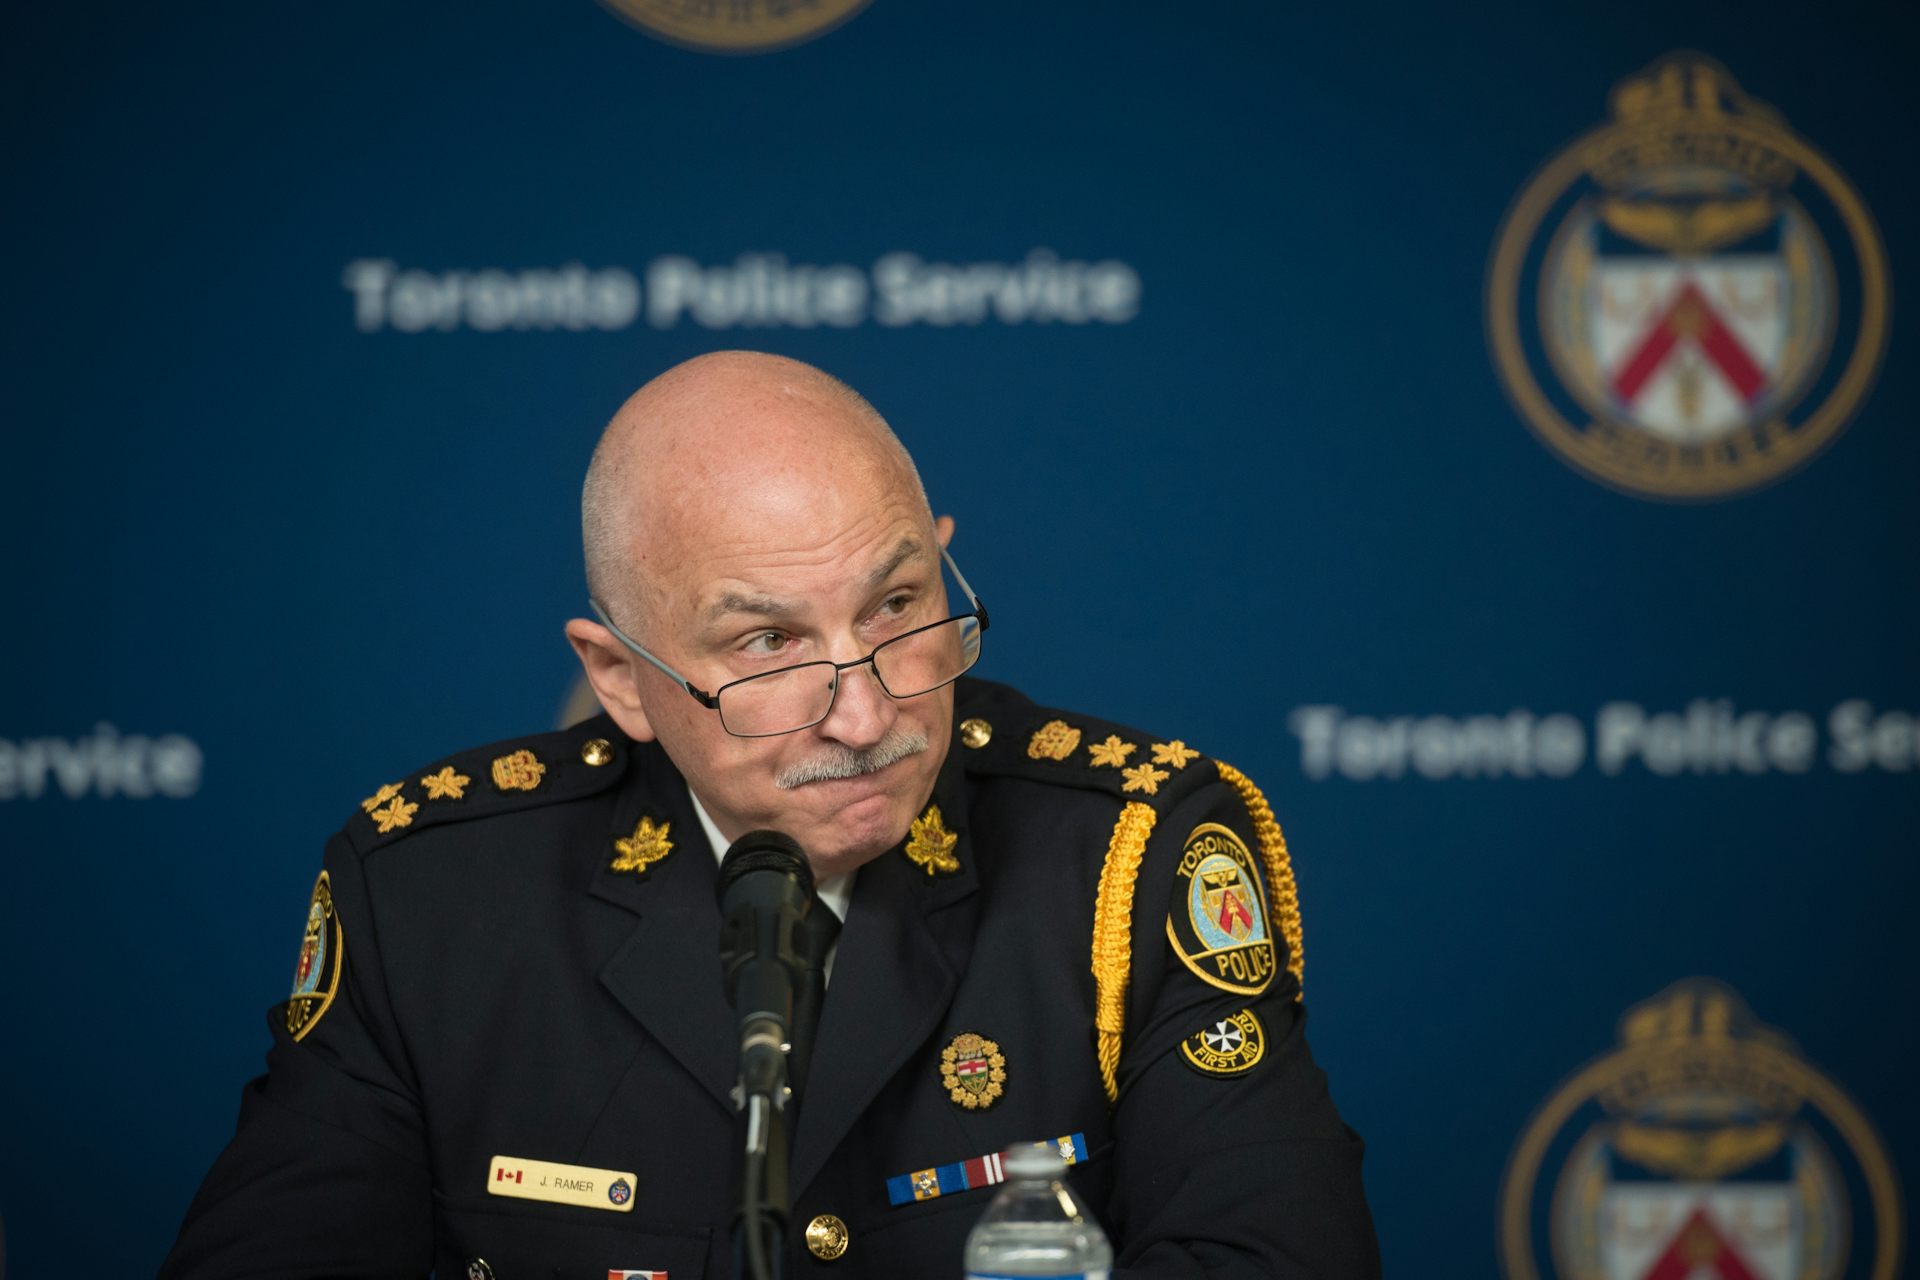 Strip searches are ineffective, unnecessary and target racialized Canadians pic